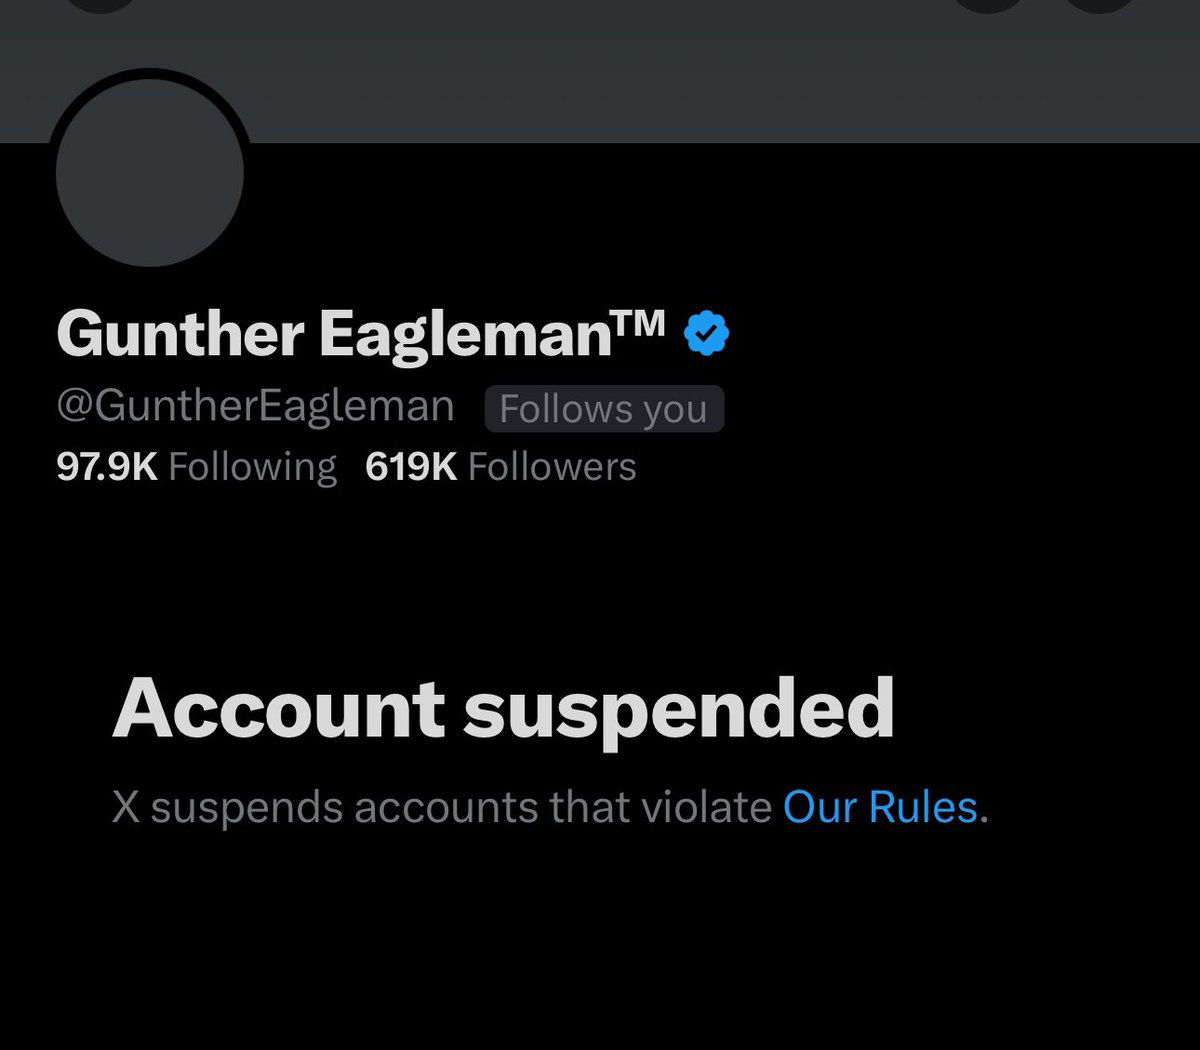 What’s up with this @elonmusk? @GuntherEagleman suspended? #FreeSpeech